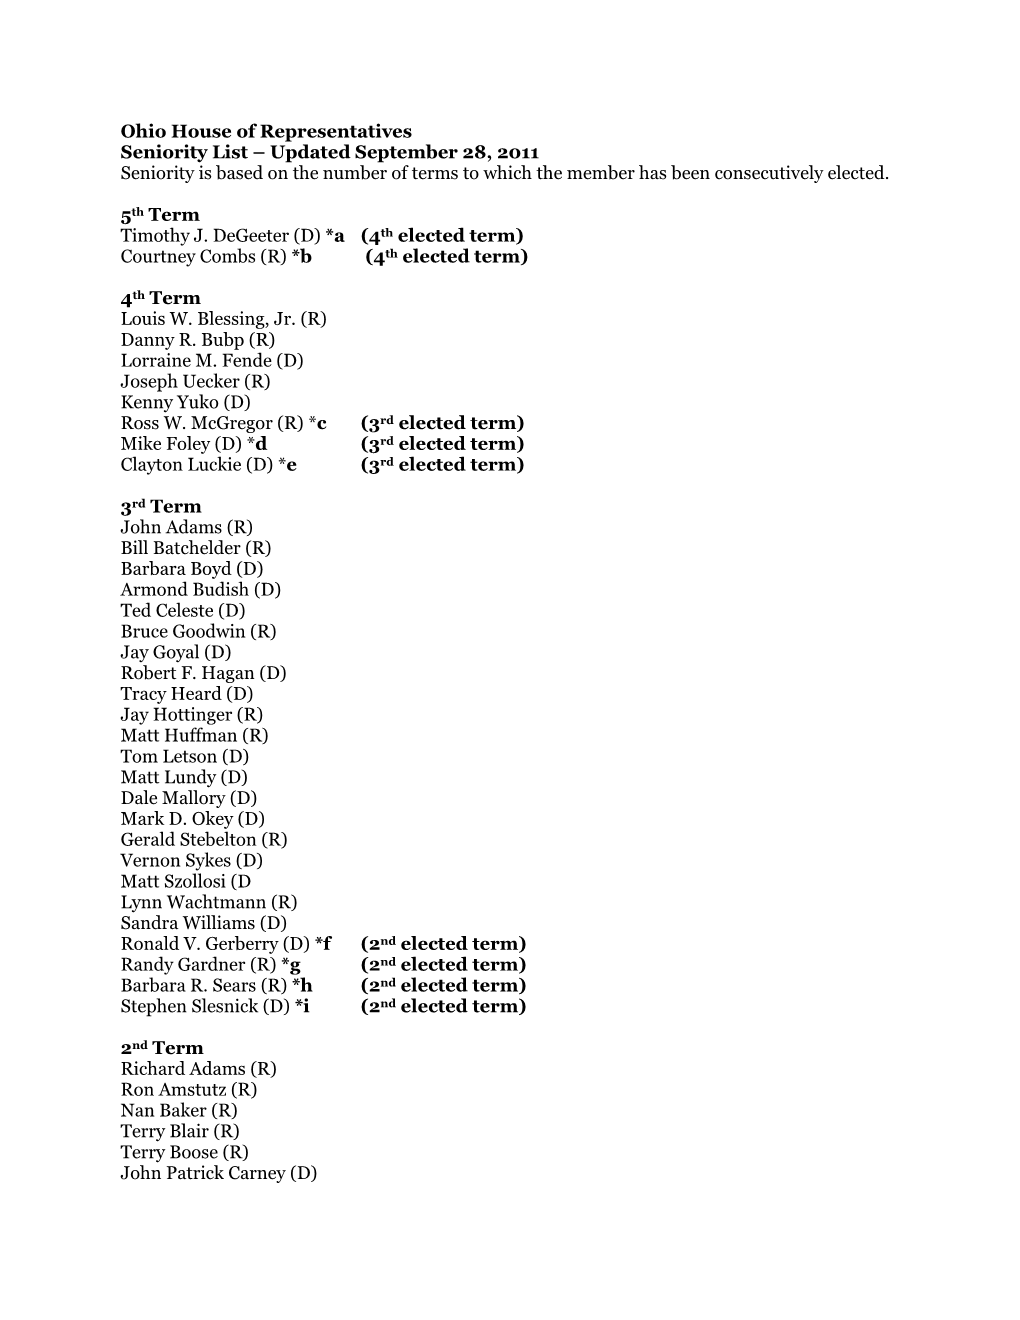 Ohio House of Representatives Seniority List – Updated September 28, 2011 Seniority Is Based on the Number of Terms to Which the Member Has Been Consecutively Elected